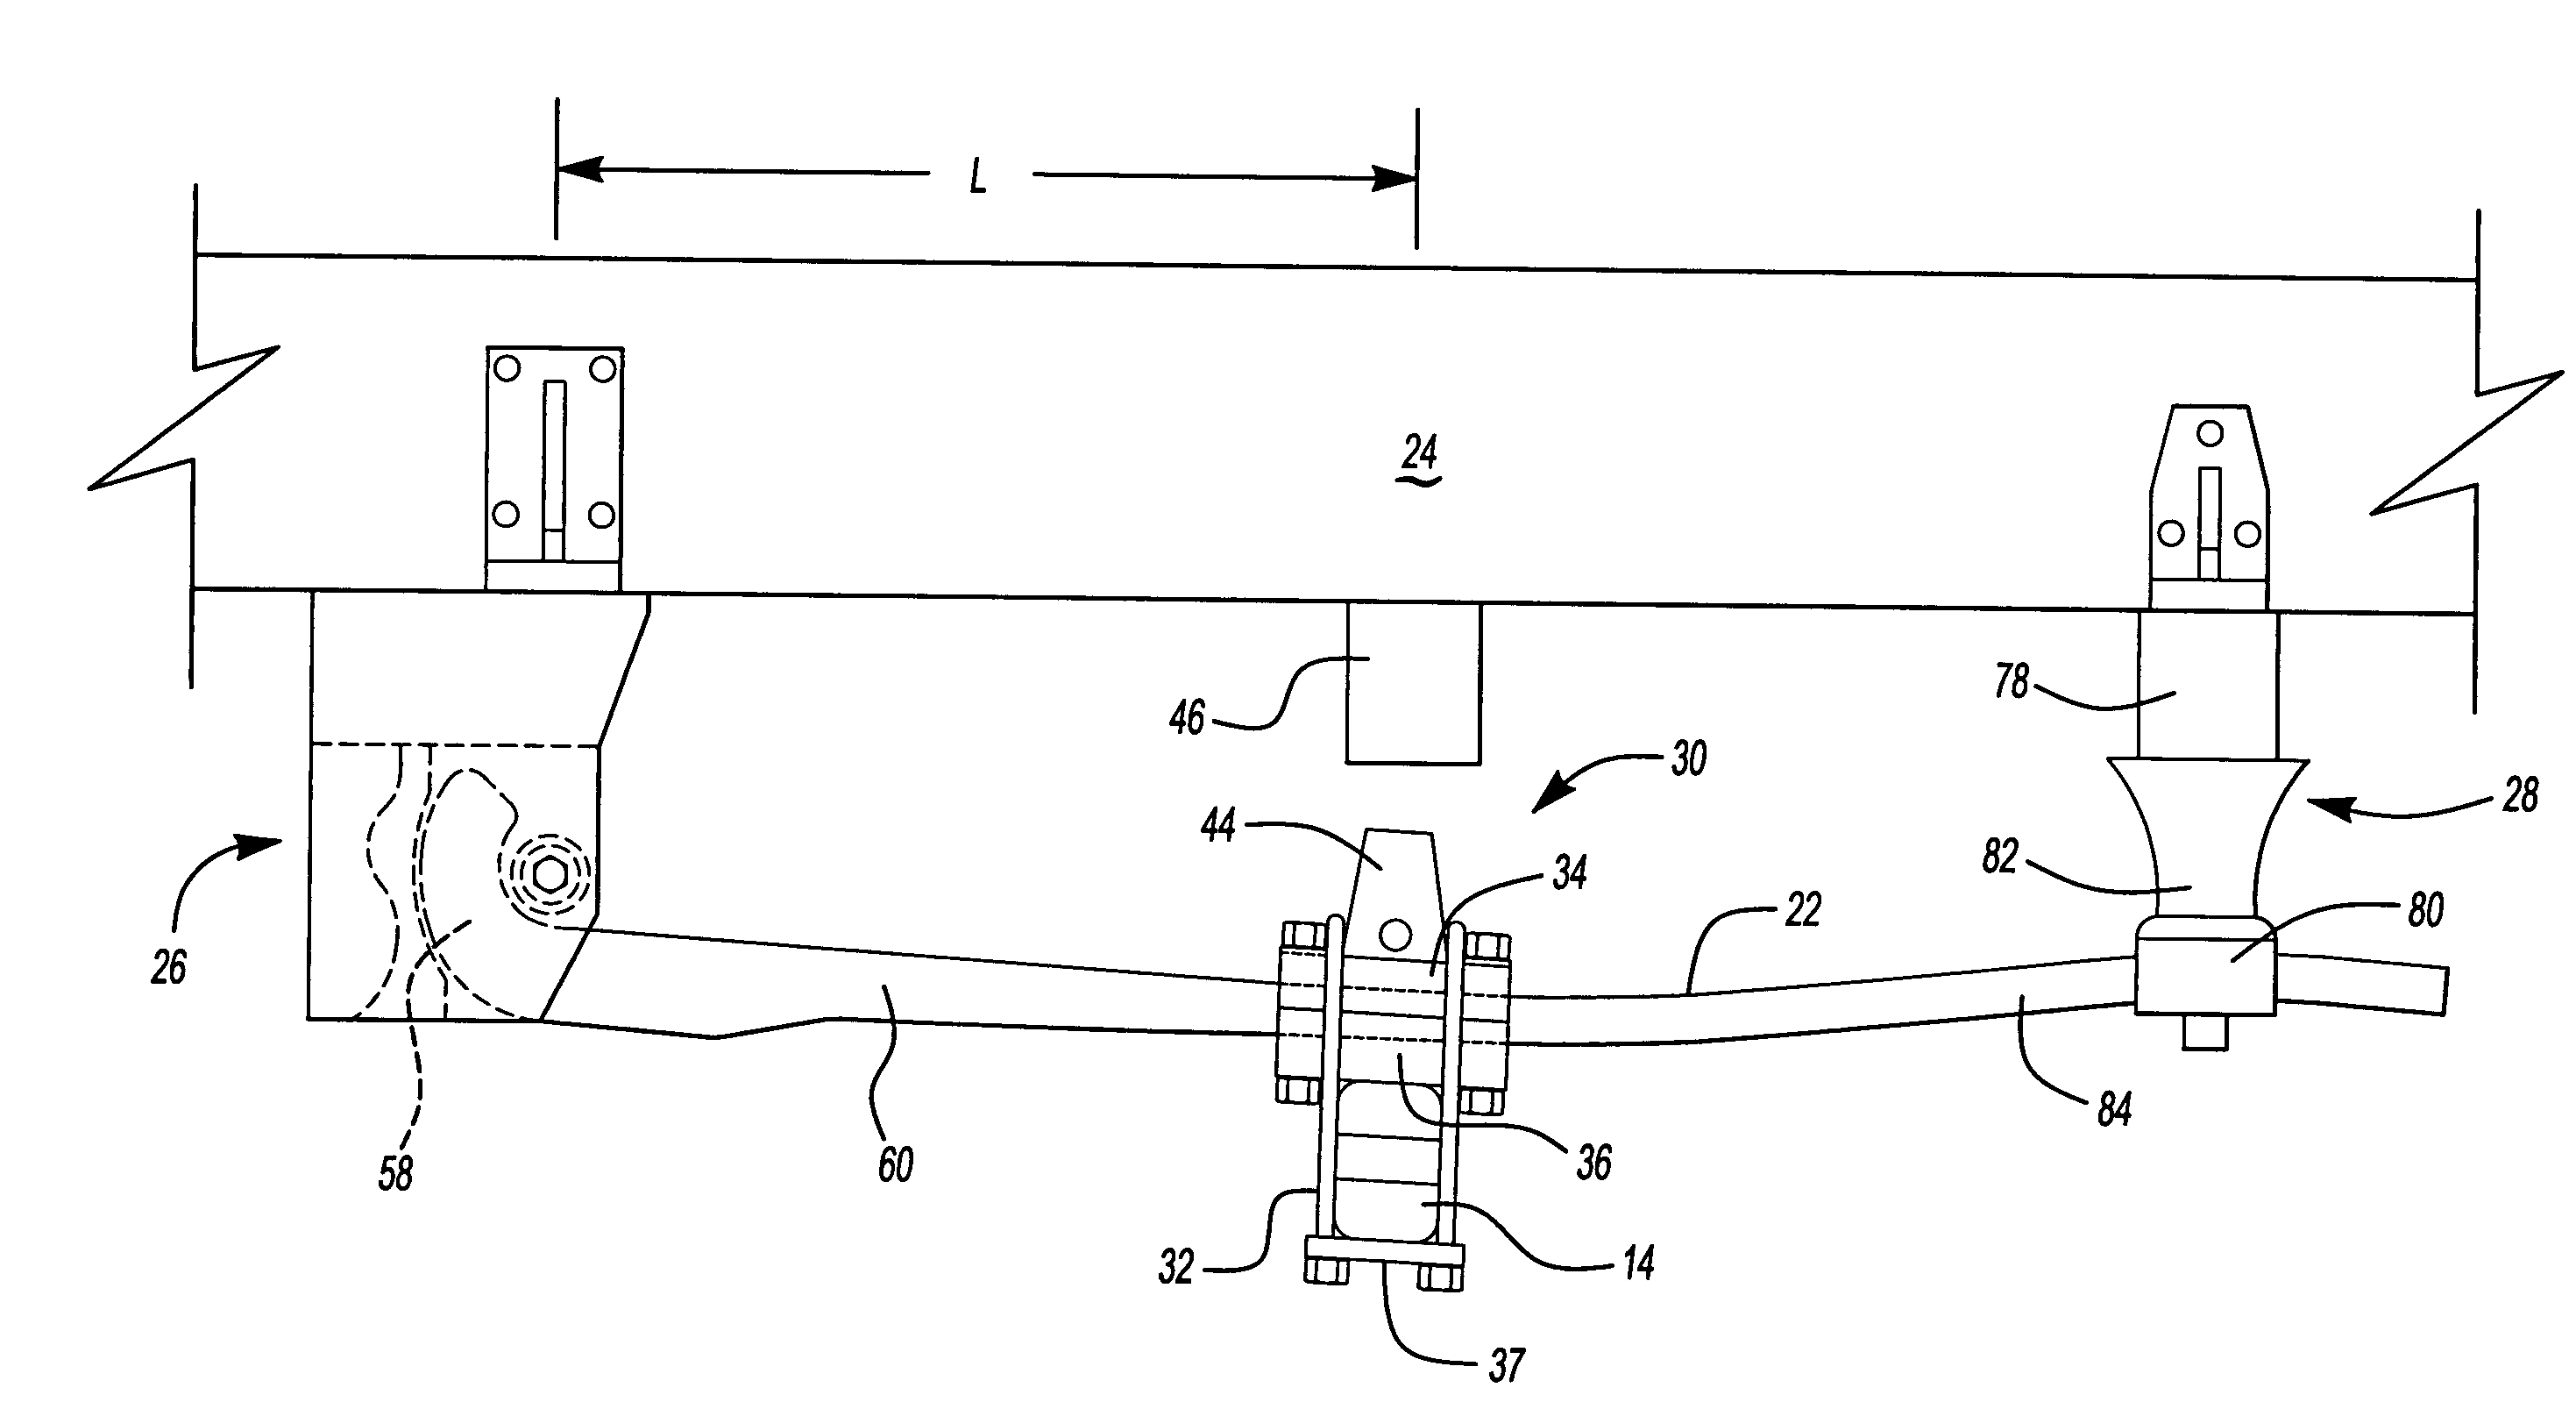 Composite leaf spring having an arcuate attachment arrangement for vehicle mounting